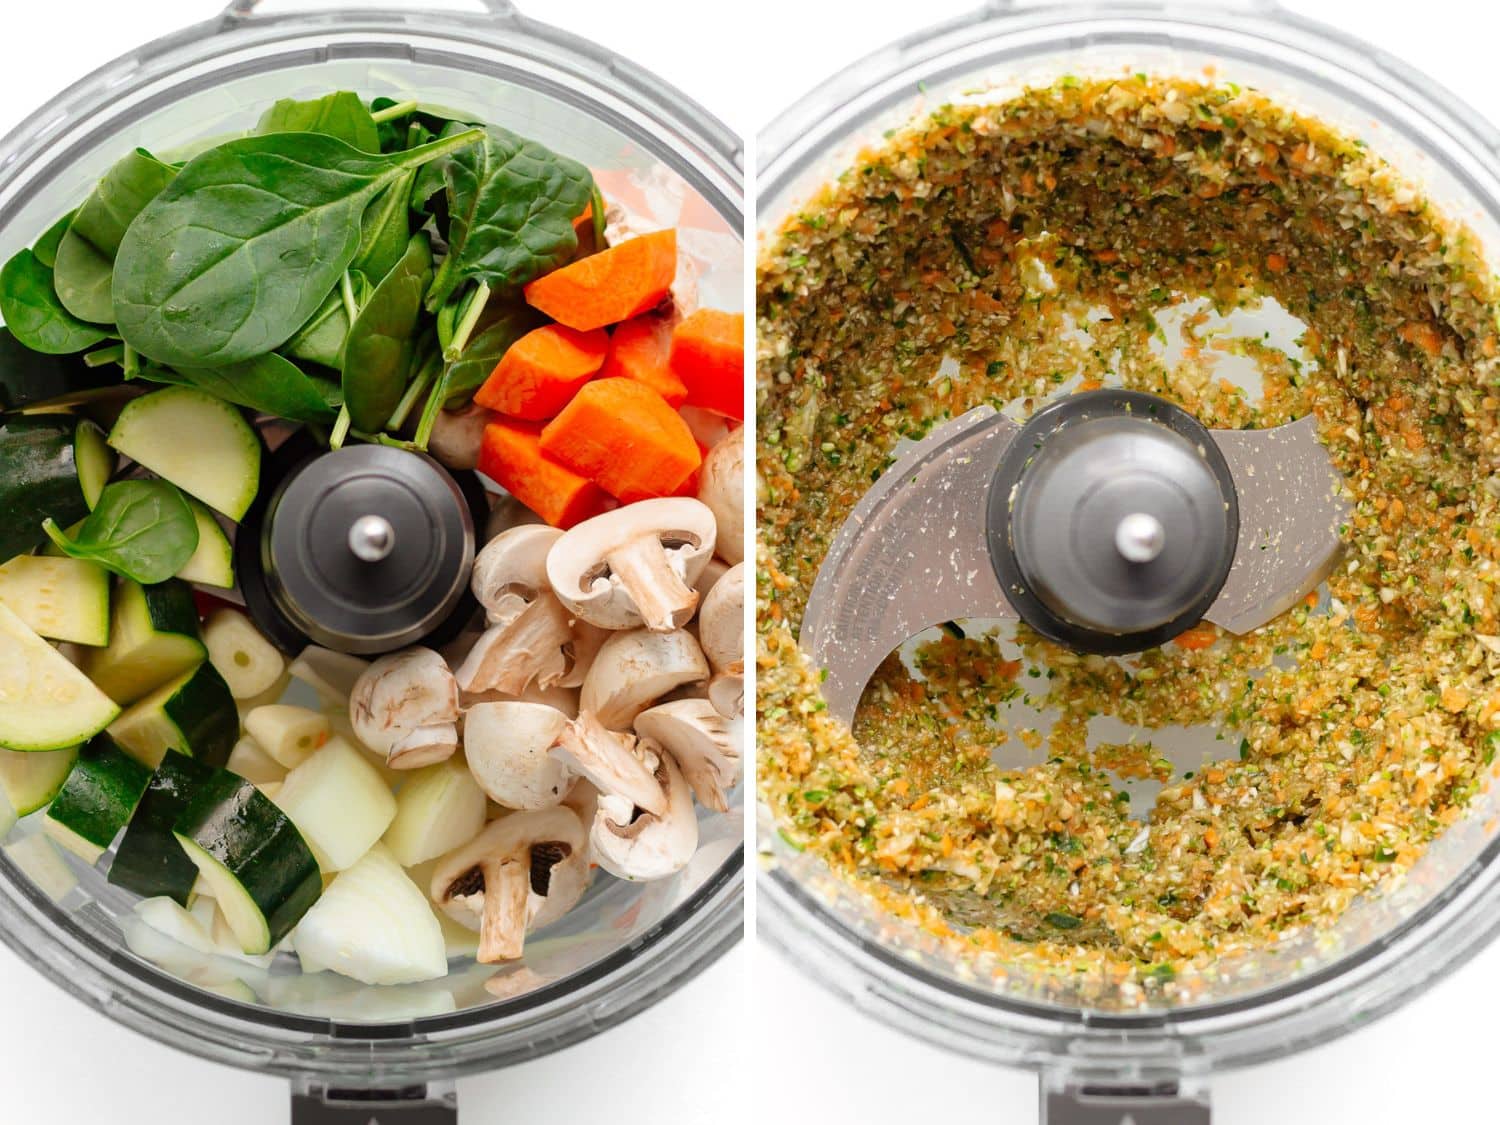 Photo collage showing veggies in a food processor before and after being finely chopped up.